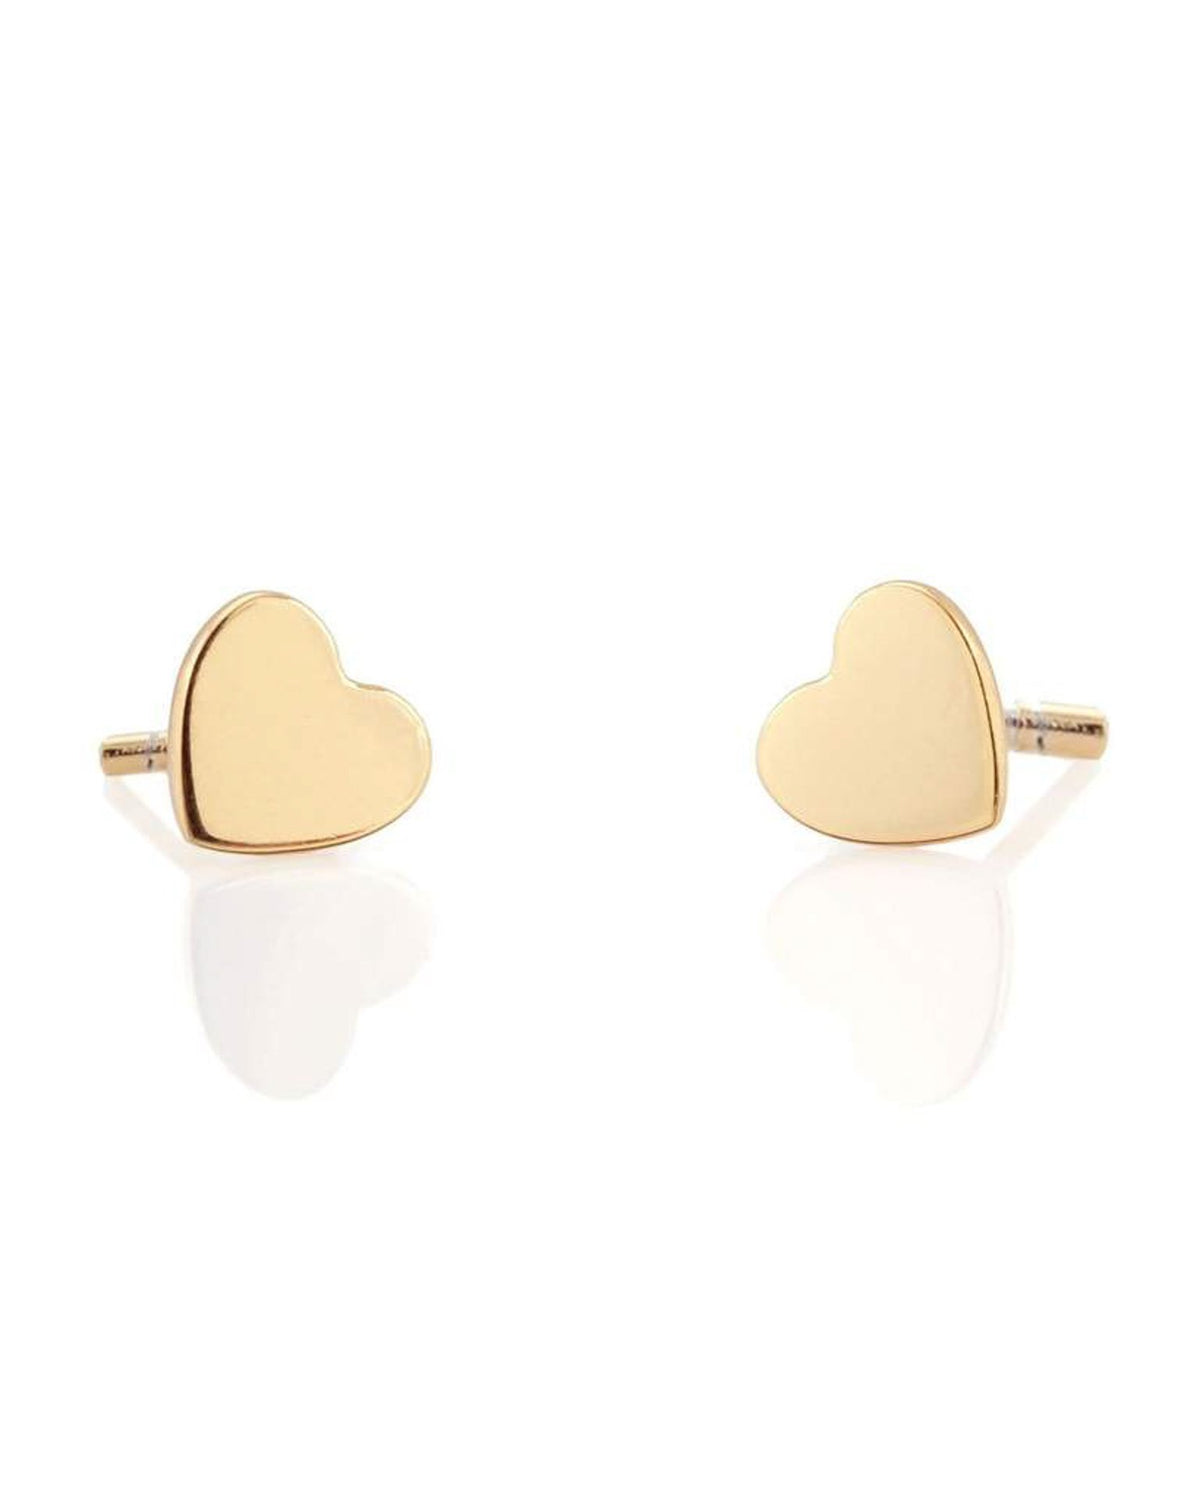 Kris Nations Jewelry 18K Gold Vermeil / Gold/Hearts Heart Studs in Gold